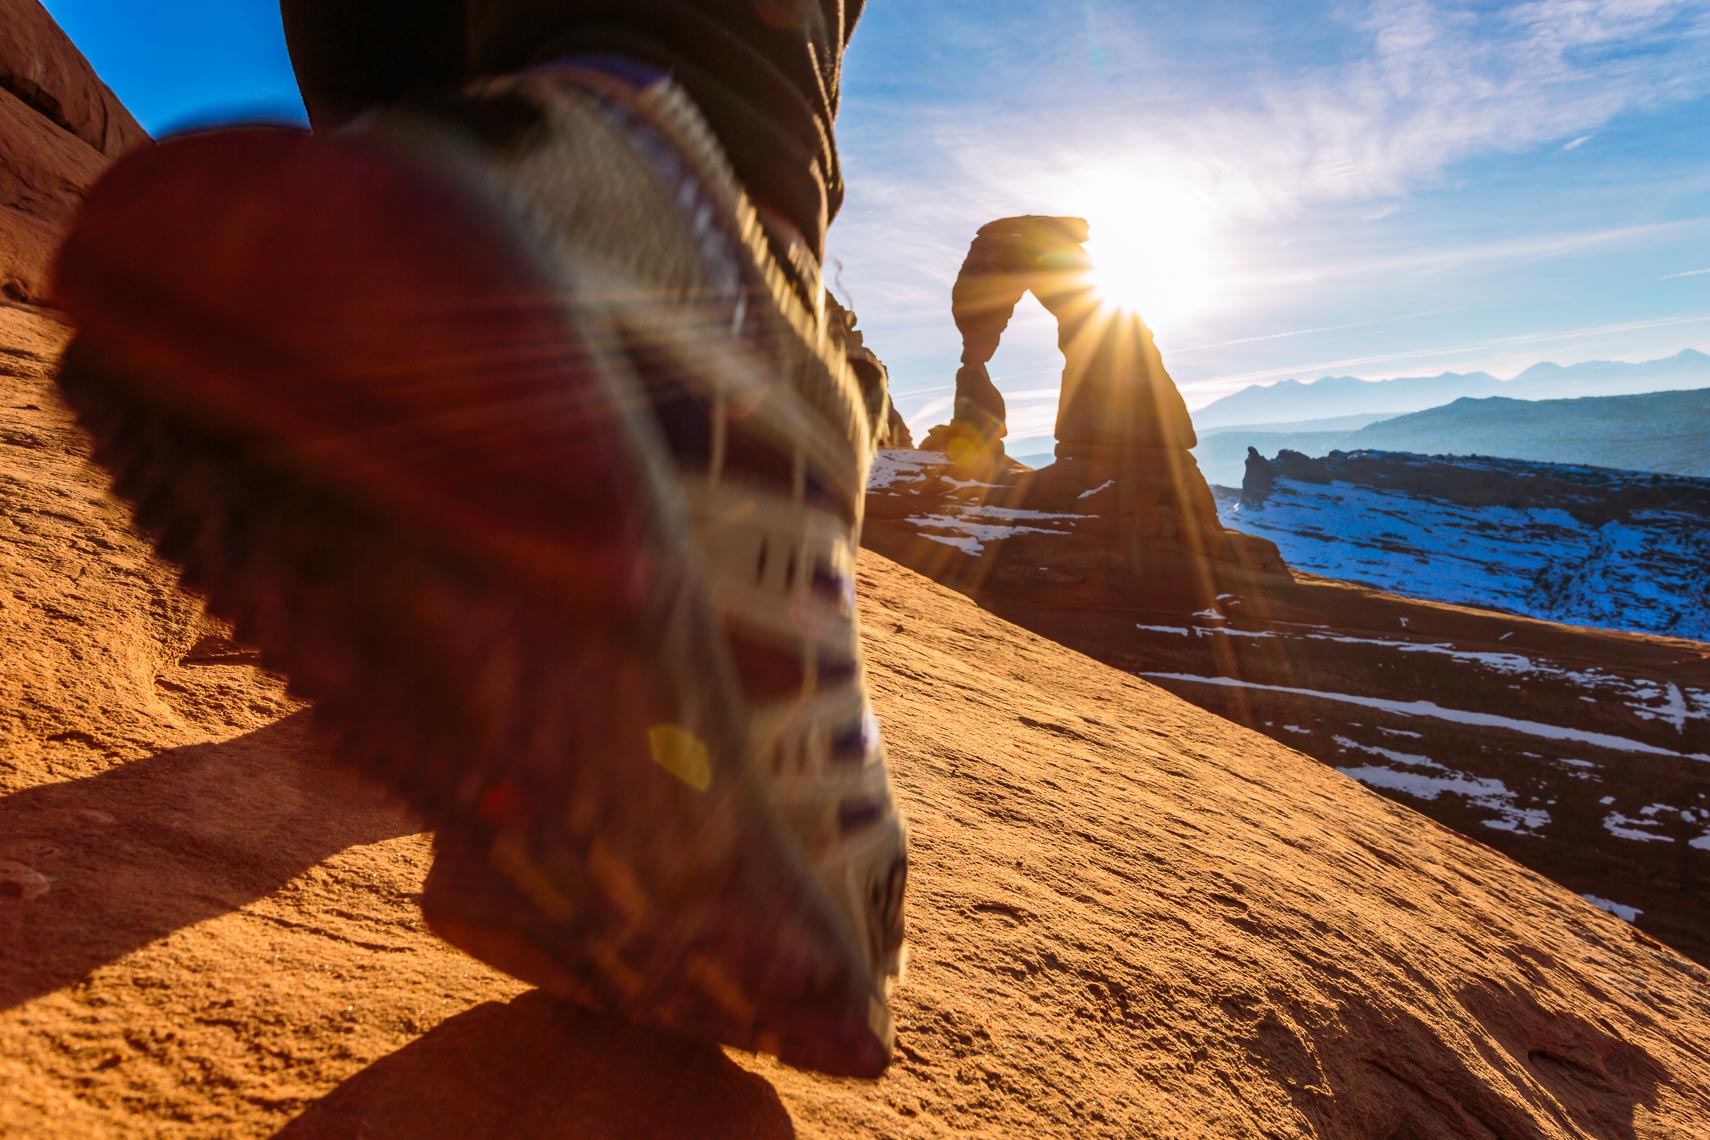 Hike to Delicate Arch Utah | Michael DeYoung